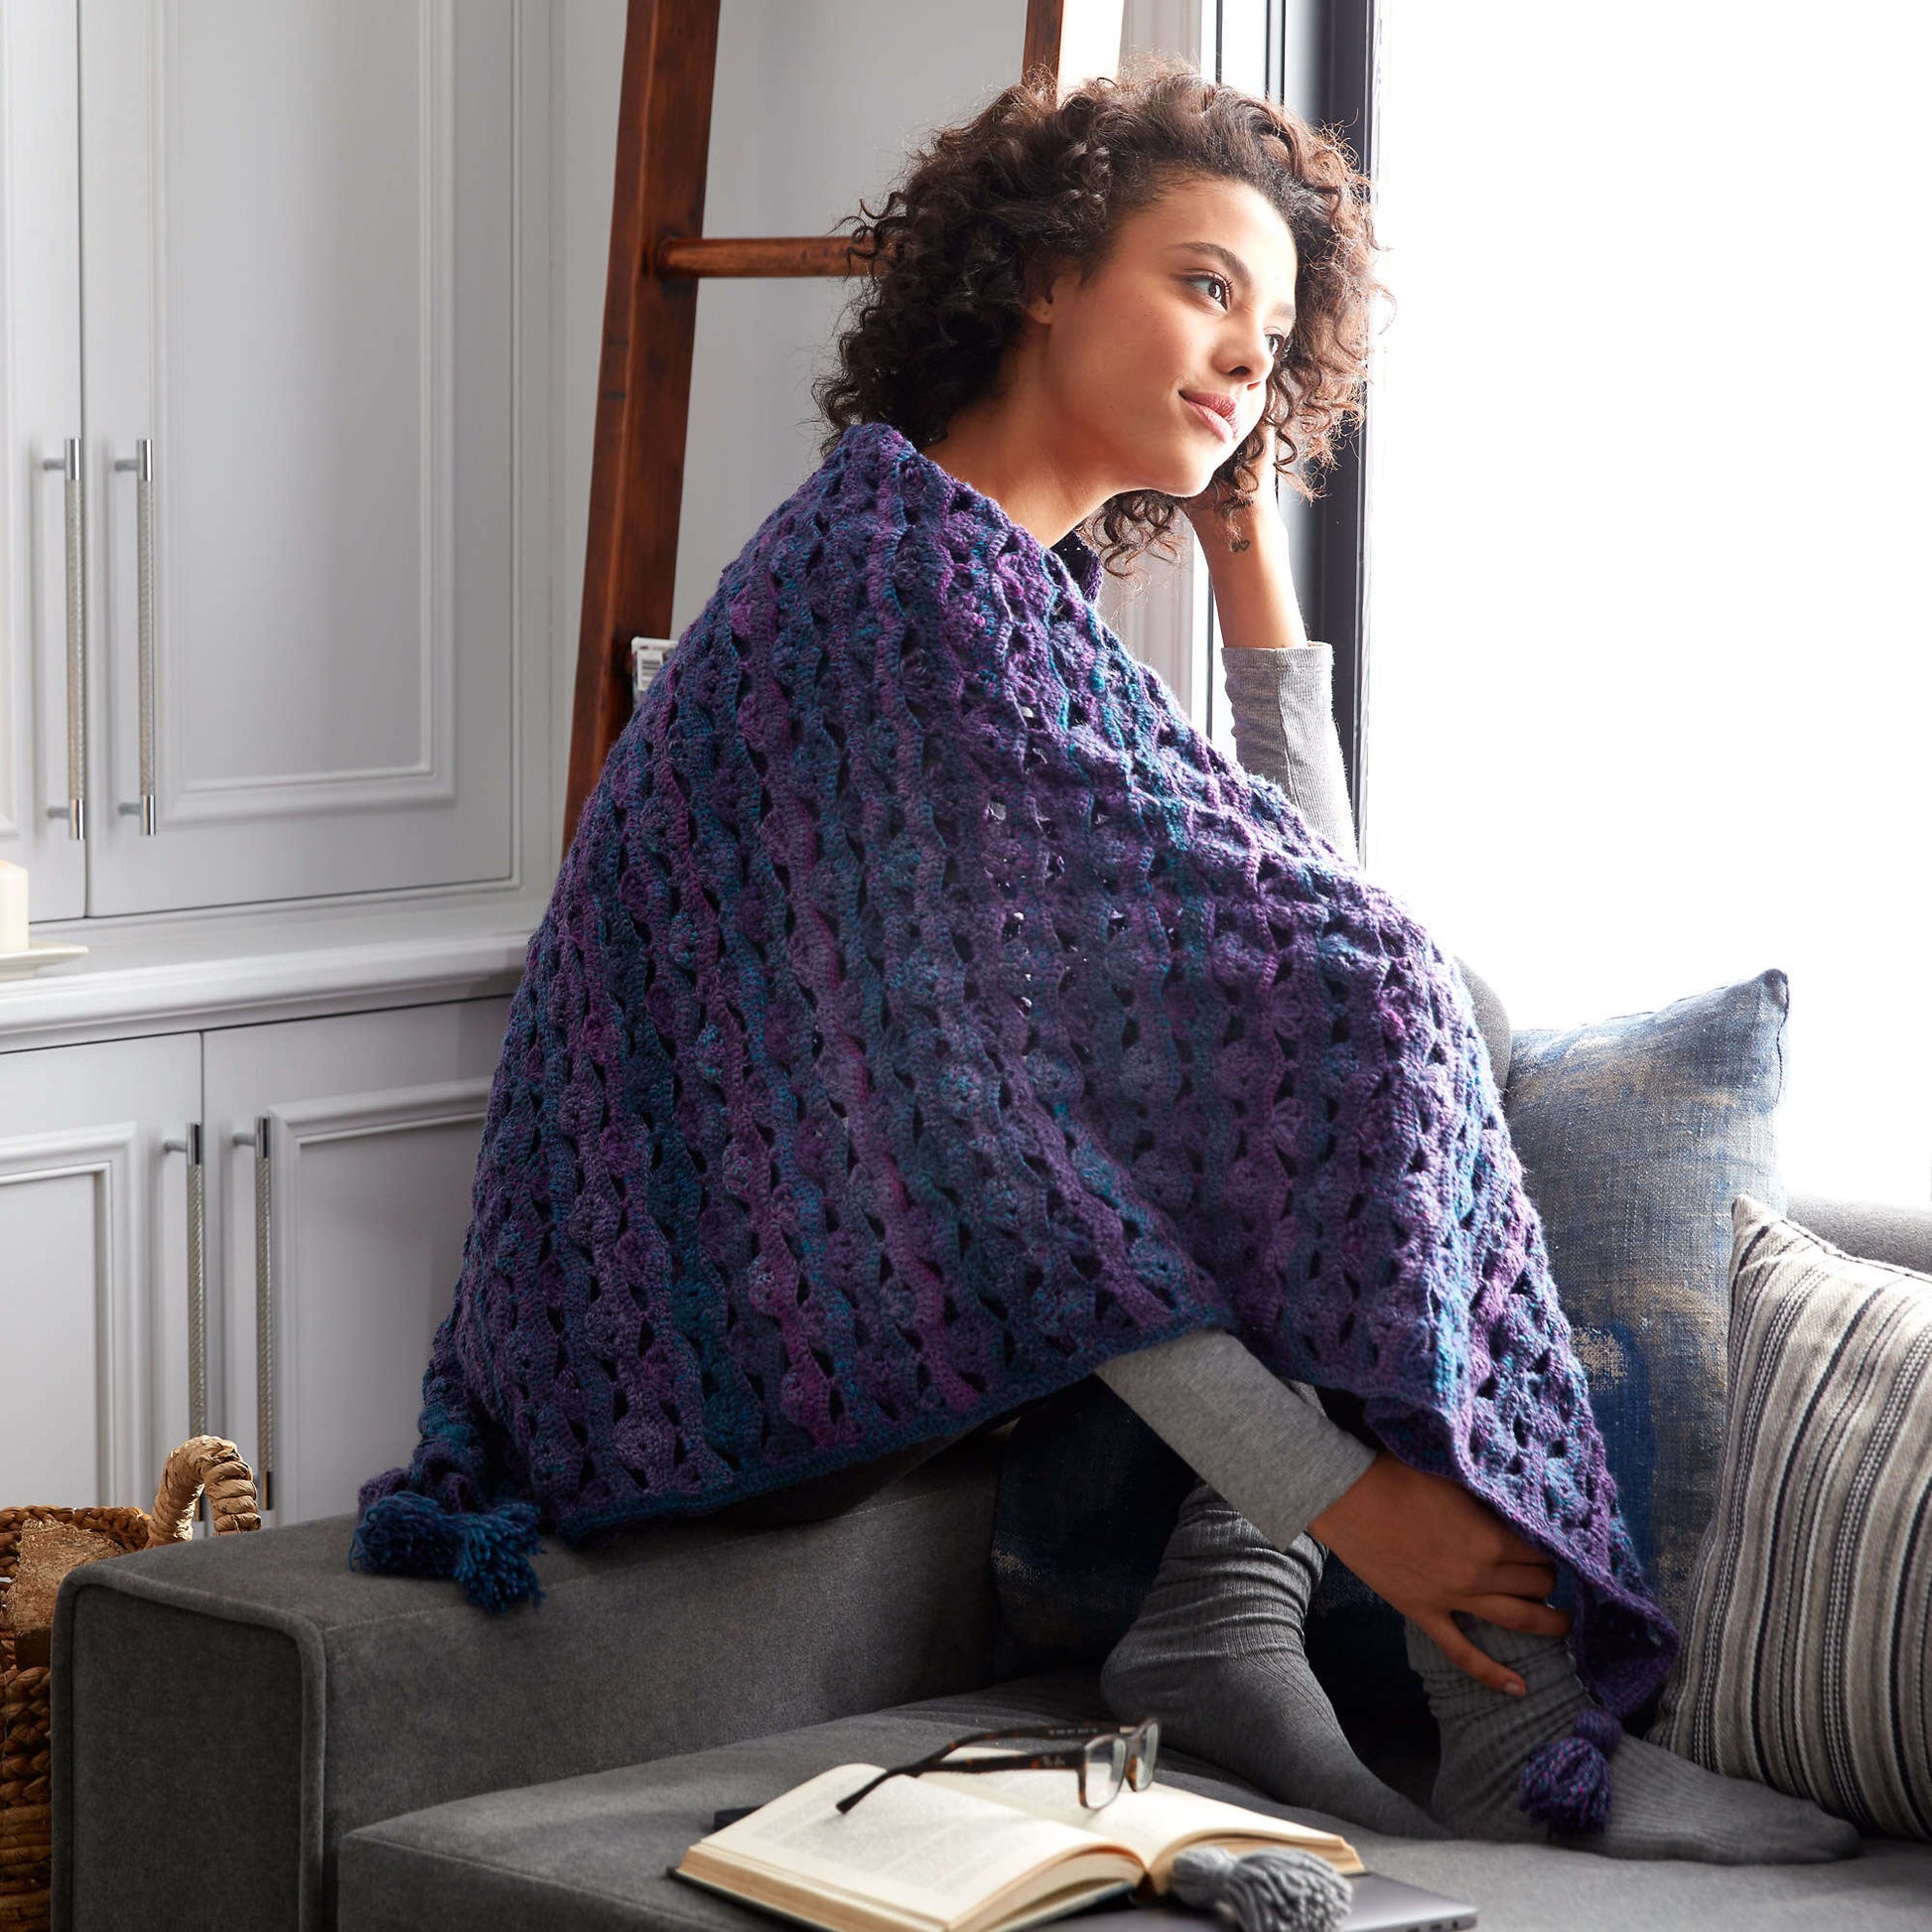 Free Patons Wrapped In Waves Crochet Blanket Shawl Pattern